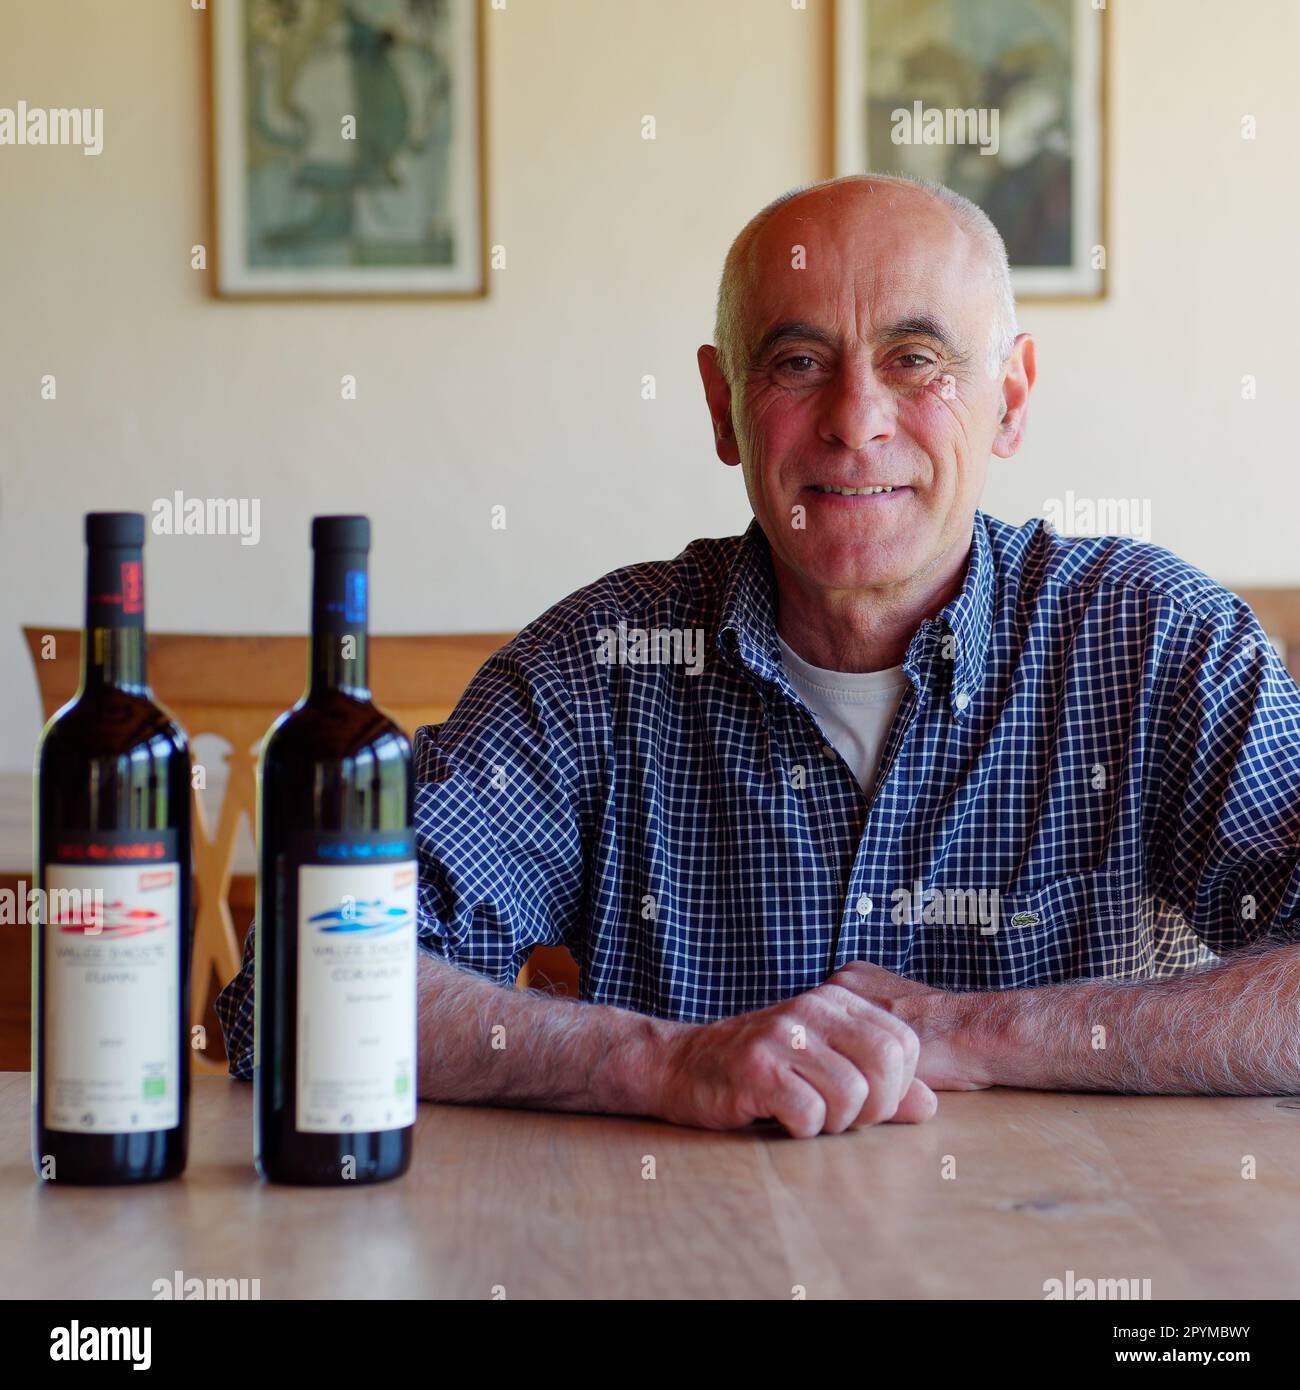 Owner of Les Granges vineyard in Aosta Valley, NW Italy, together with bottles of wine Stock Photo